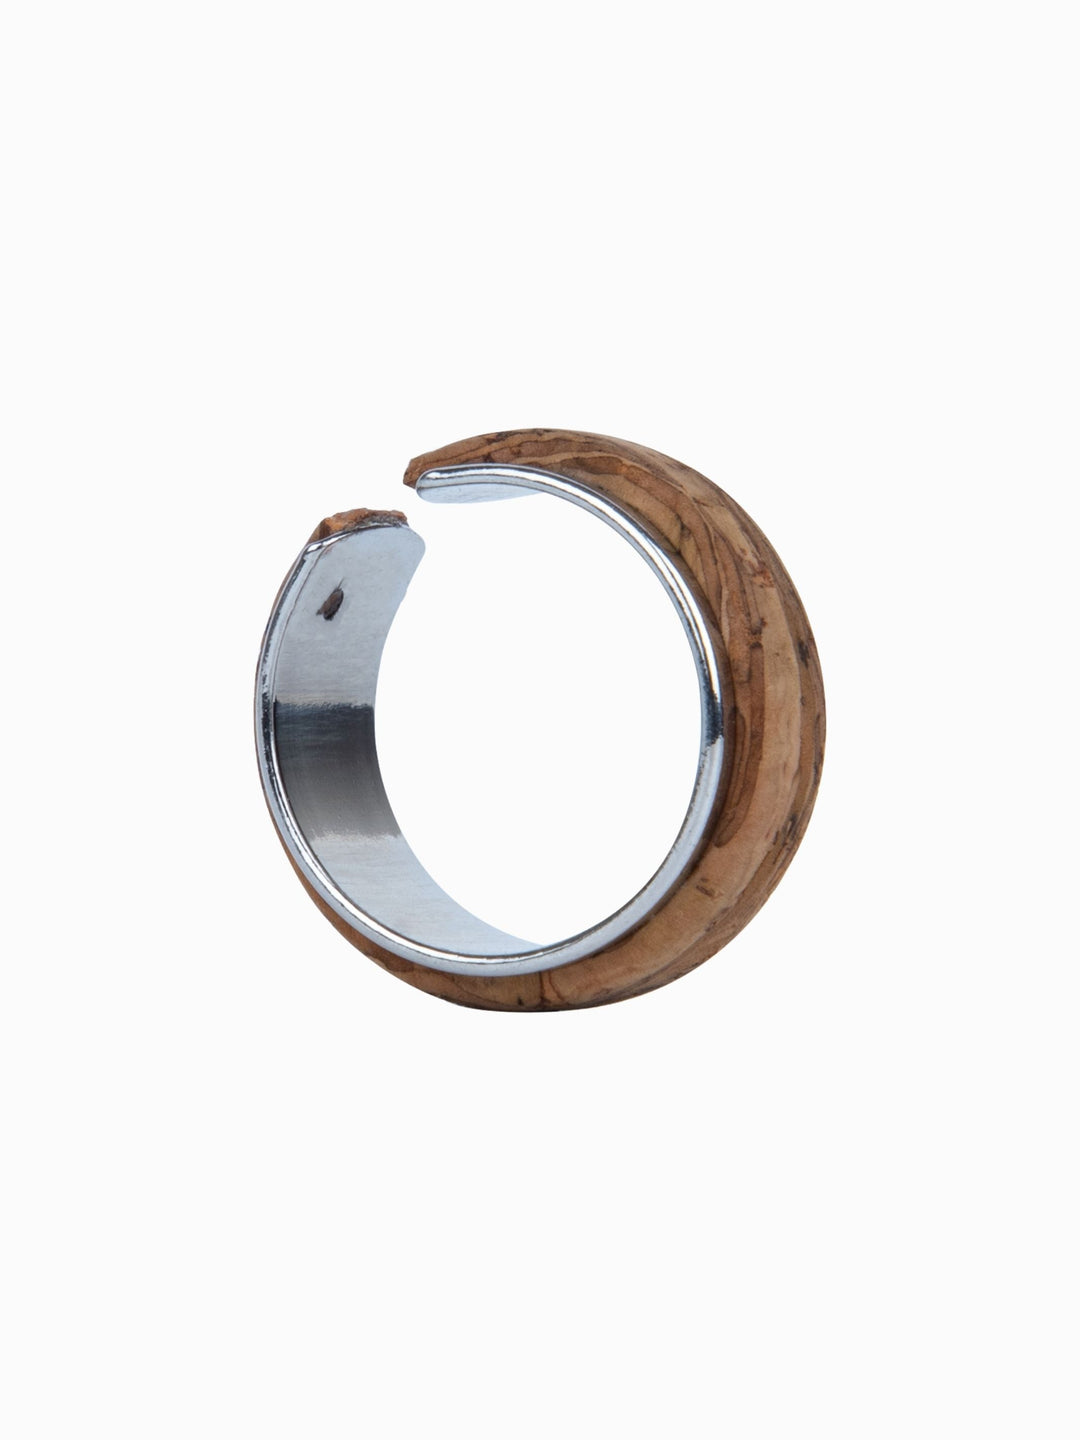 FOReT Bark Band  Ring with Cork